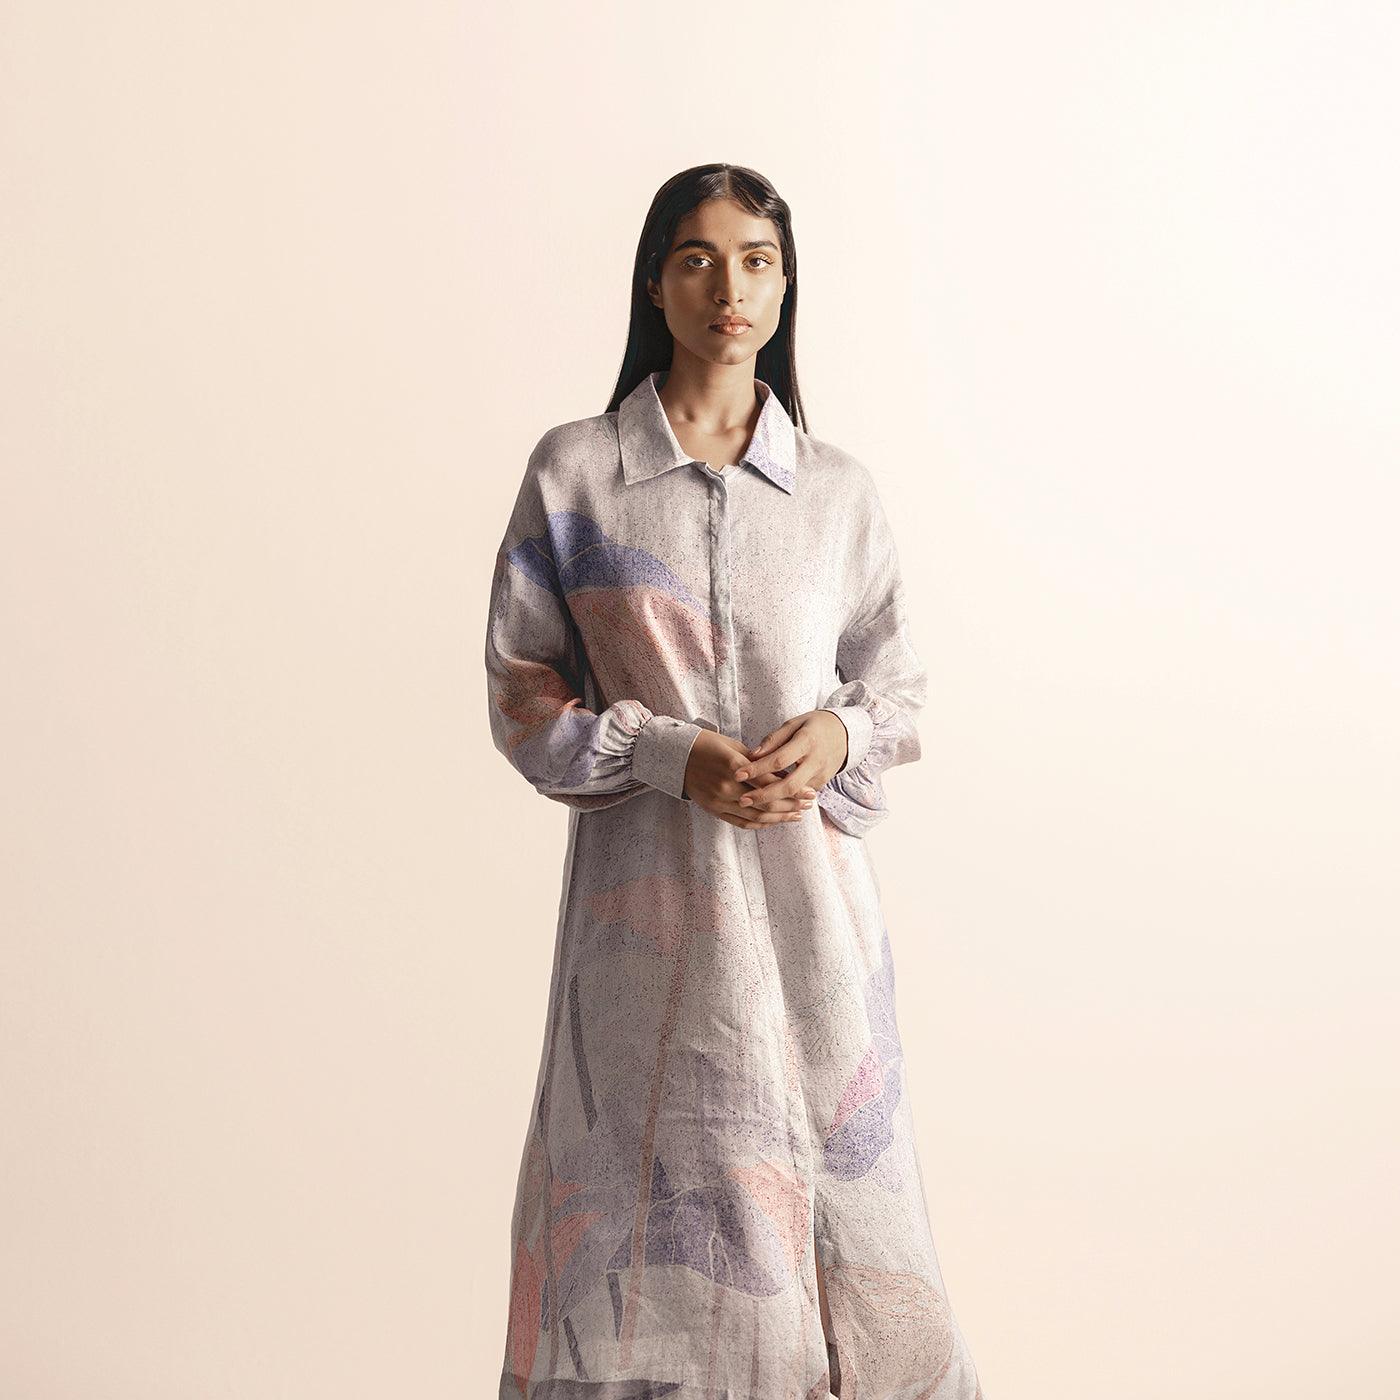 LOTUS POND GRAPHIC PRINTED A-LINE SHIRT DRESS WITH BISHOP SLEEVES